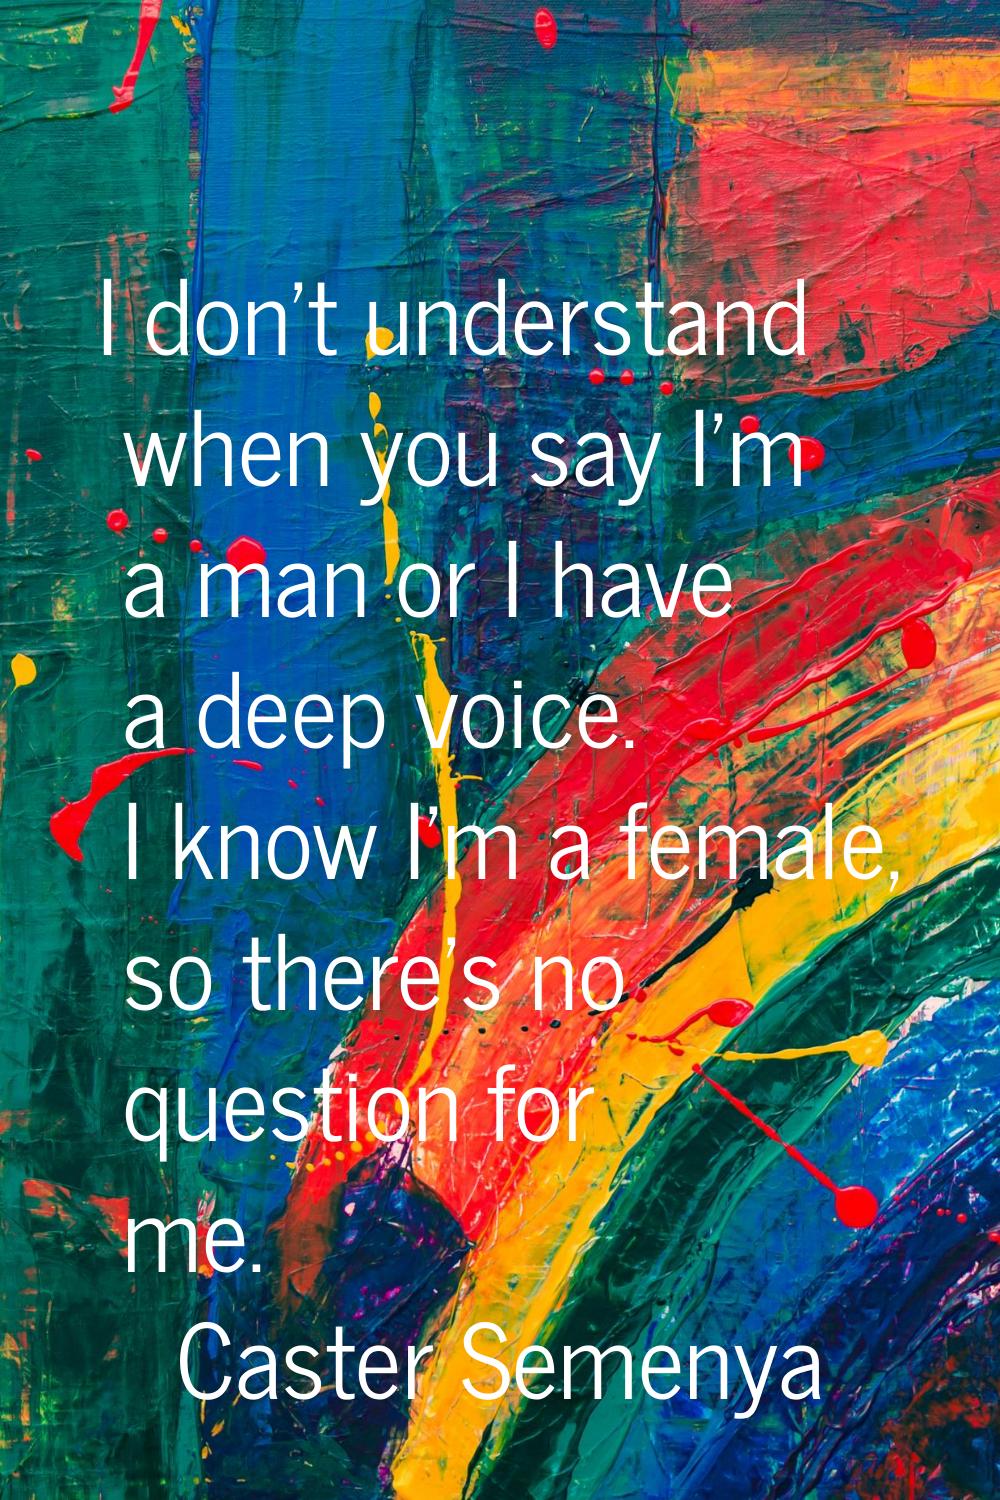 I don't understand when you say I'm a man or I have a deep voice. I know I'm a female, so there's n